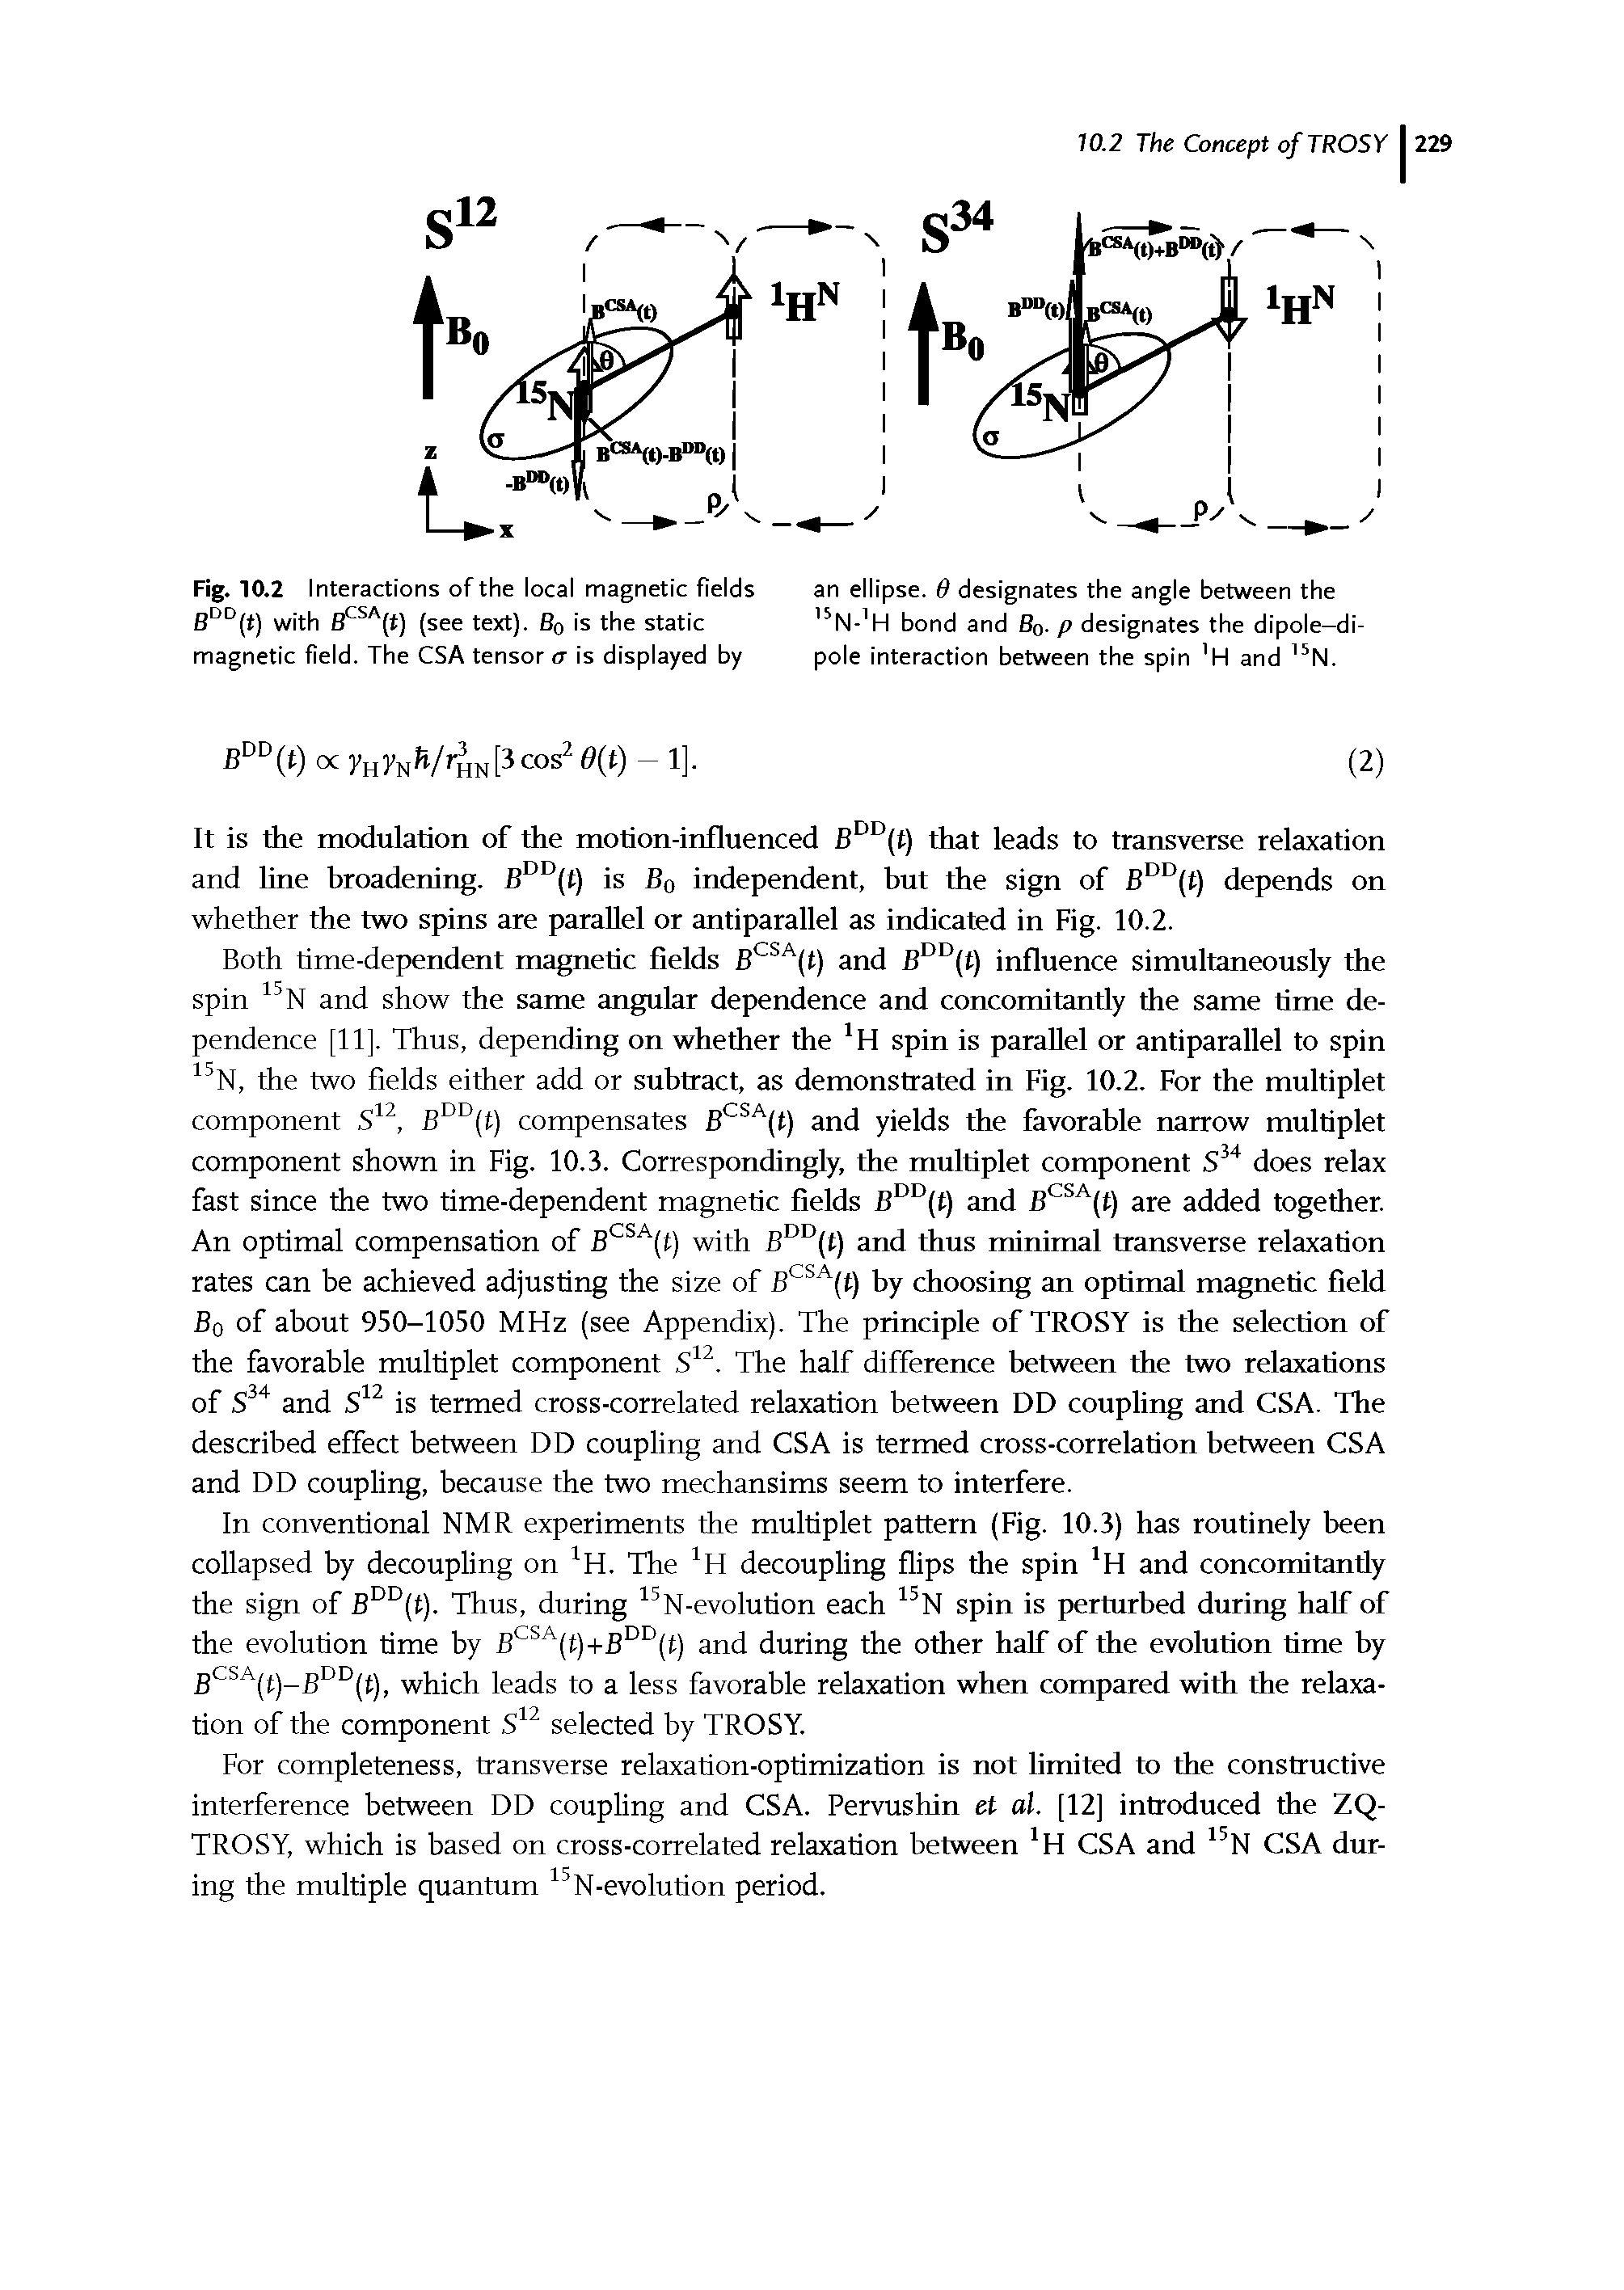 Fig. 10.2 Interactions of the local magnetic fields eDD(t) with EFSA(t) (see text). 80 s the static magnetic field. The CSA tensor a is displayed by...